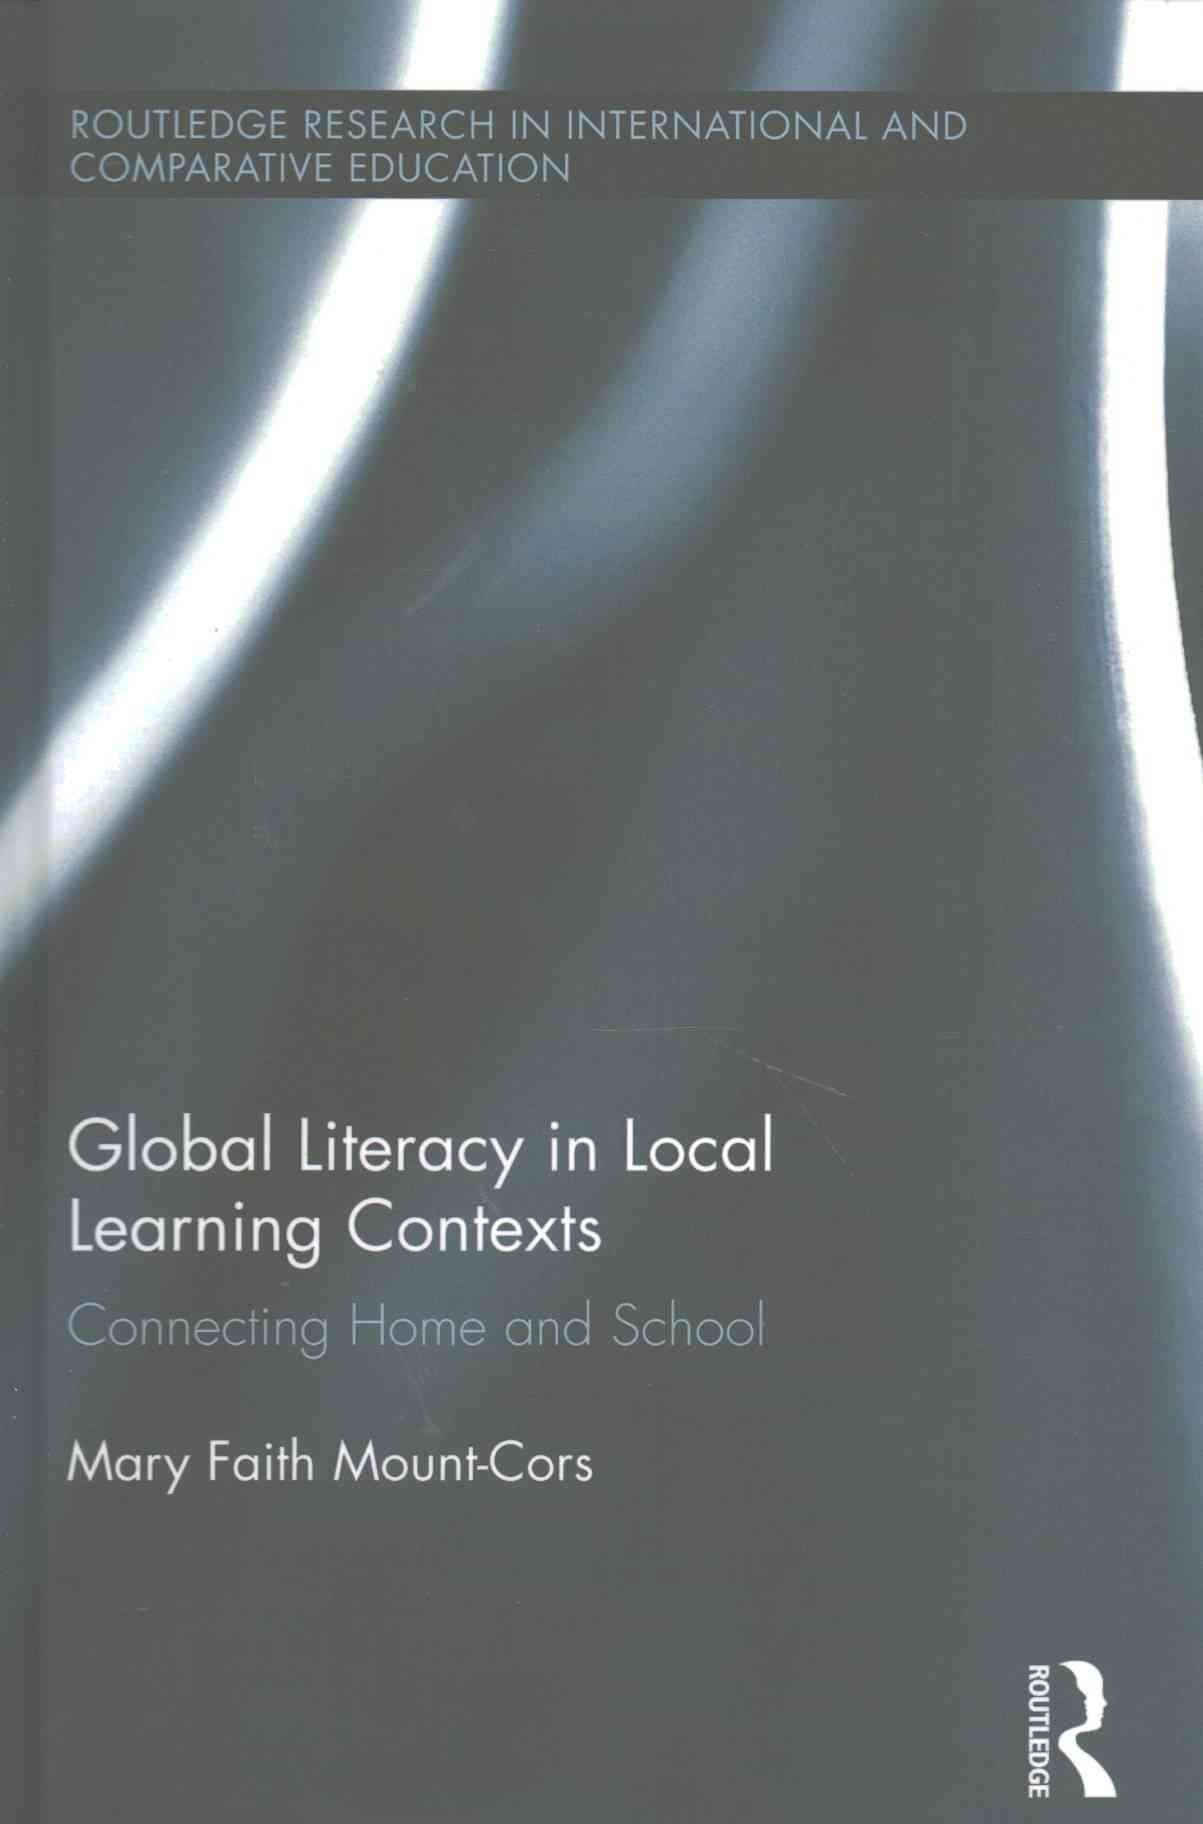 Global Literacy in Local Learning Contexts